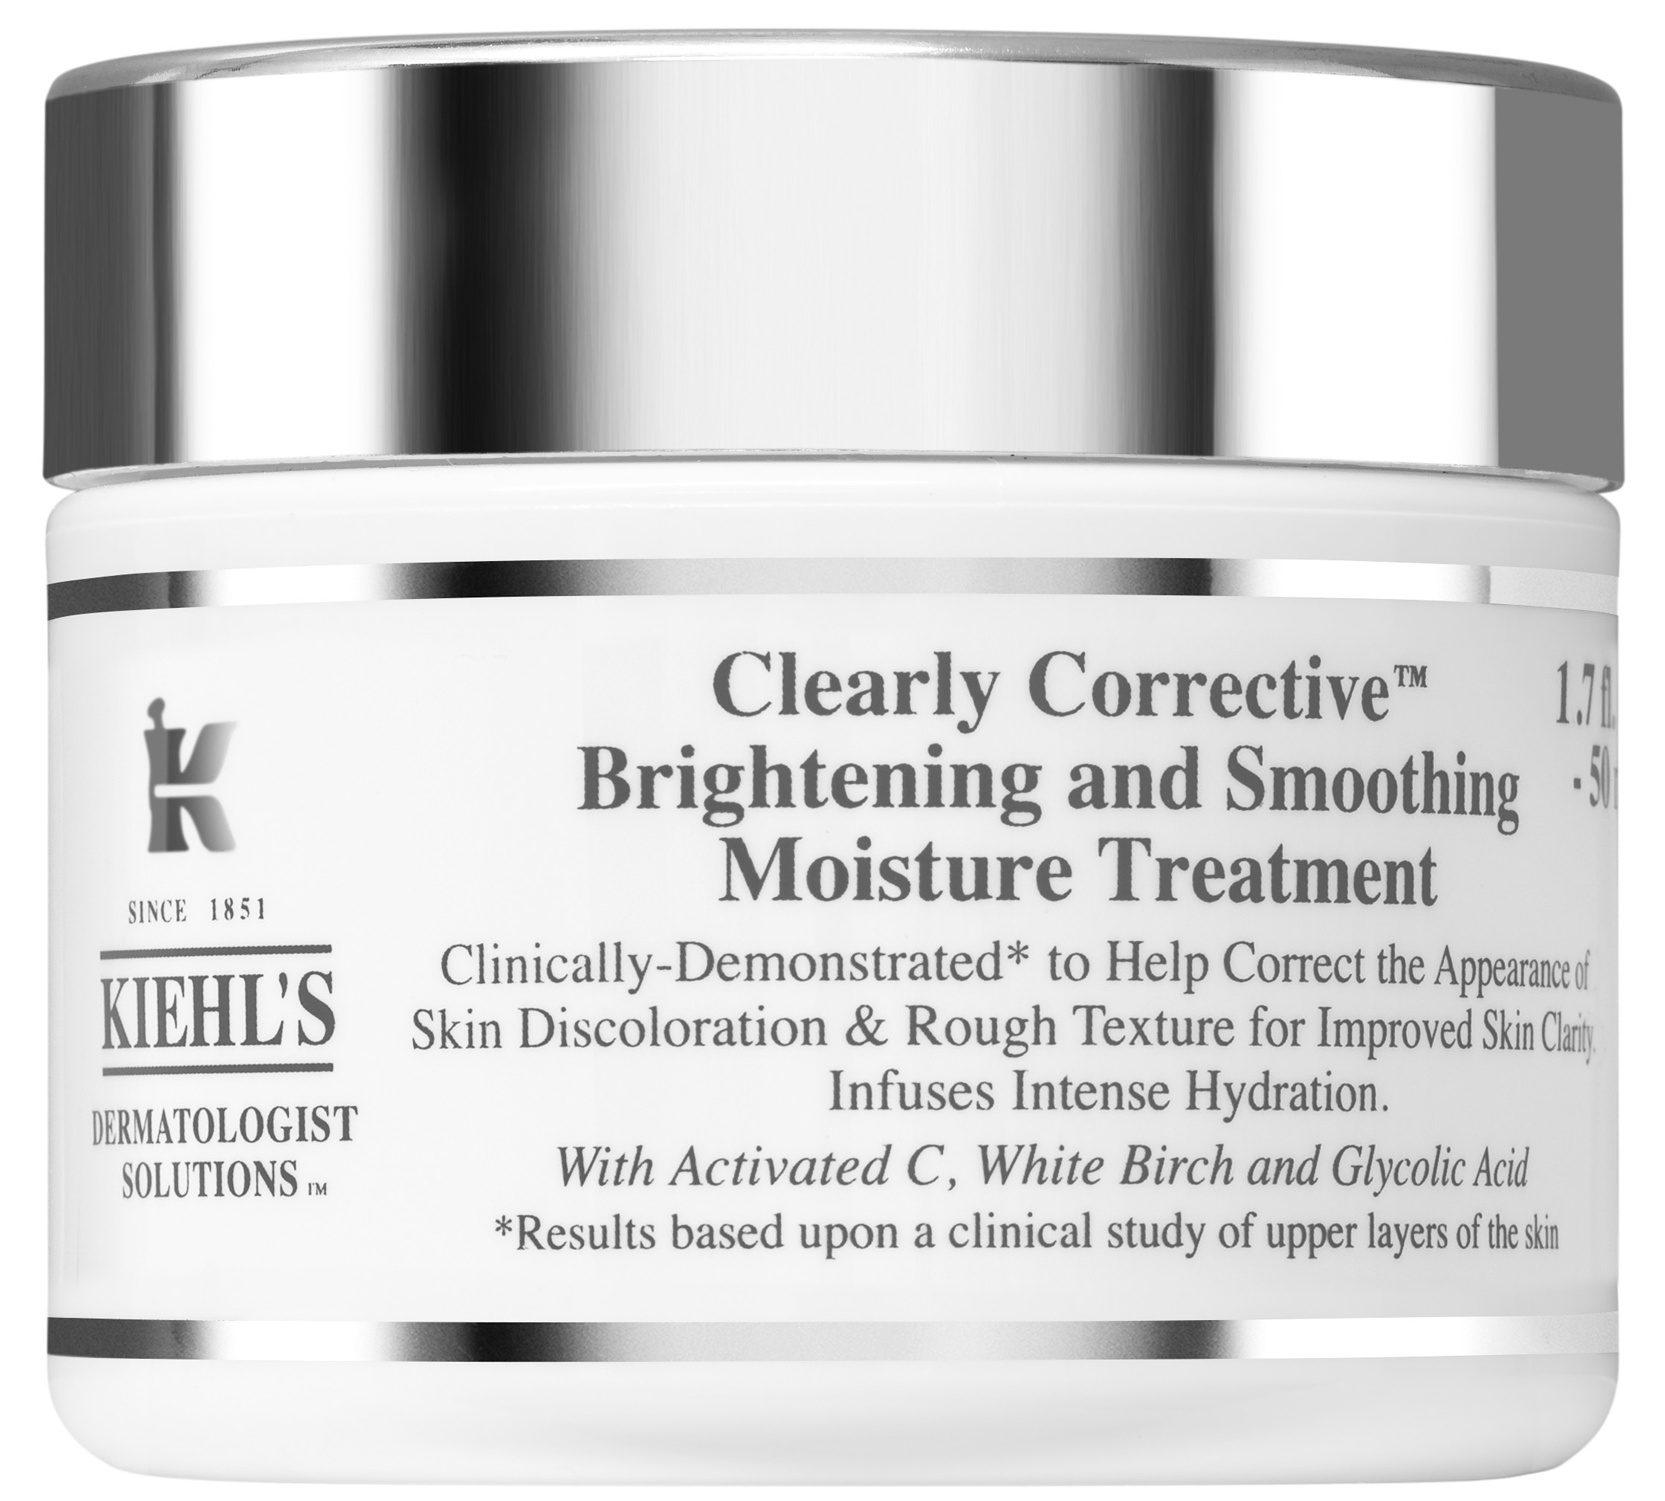 Kiehl’s Clearly Corrective Brightening & Smoothing Moisture Treatment